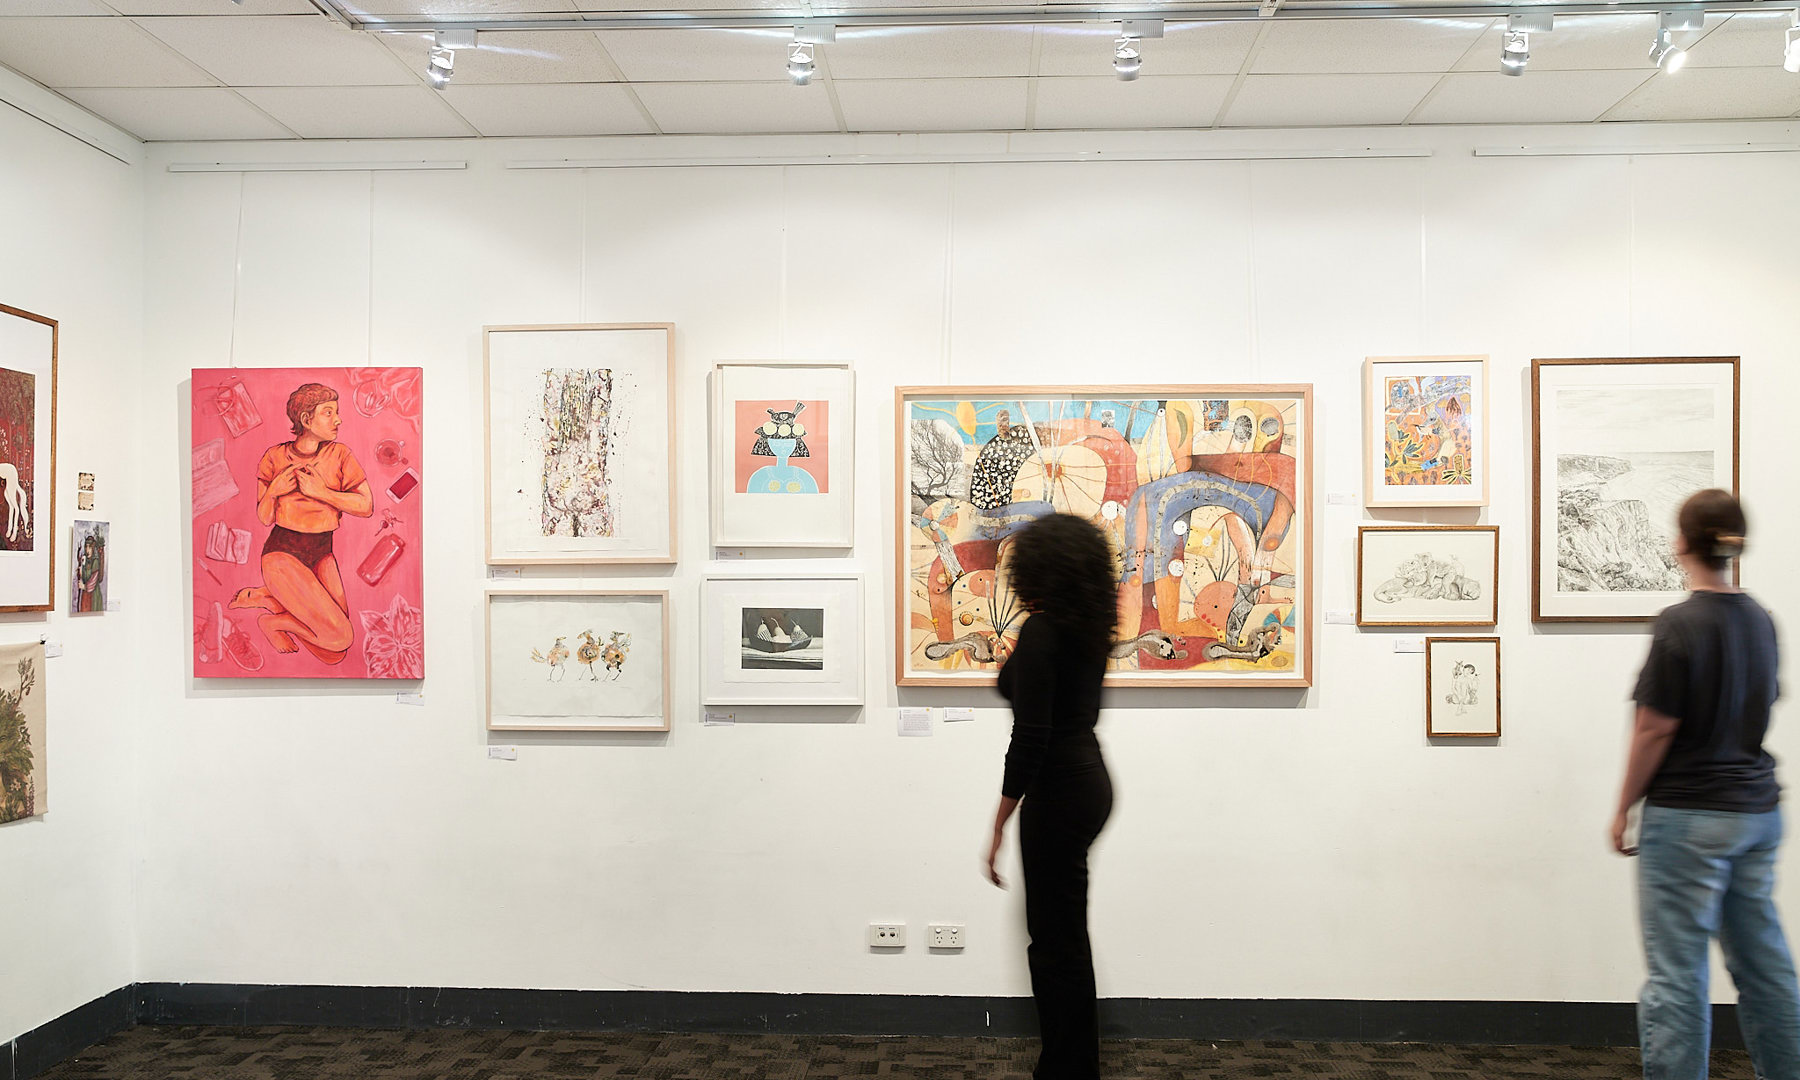 A gallery wall with student illustration artwork displayed. There are two visitors observing the art work.